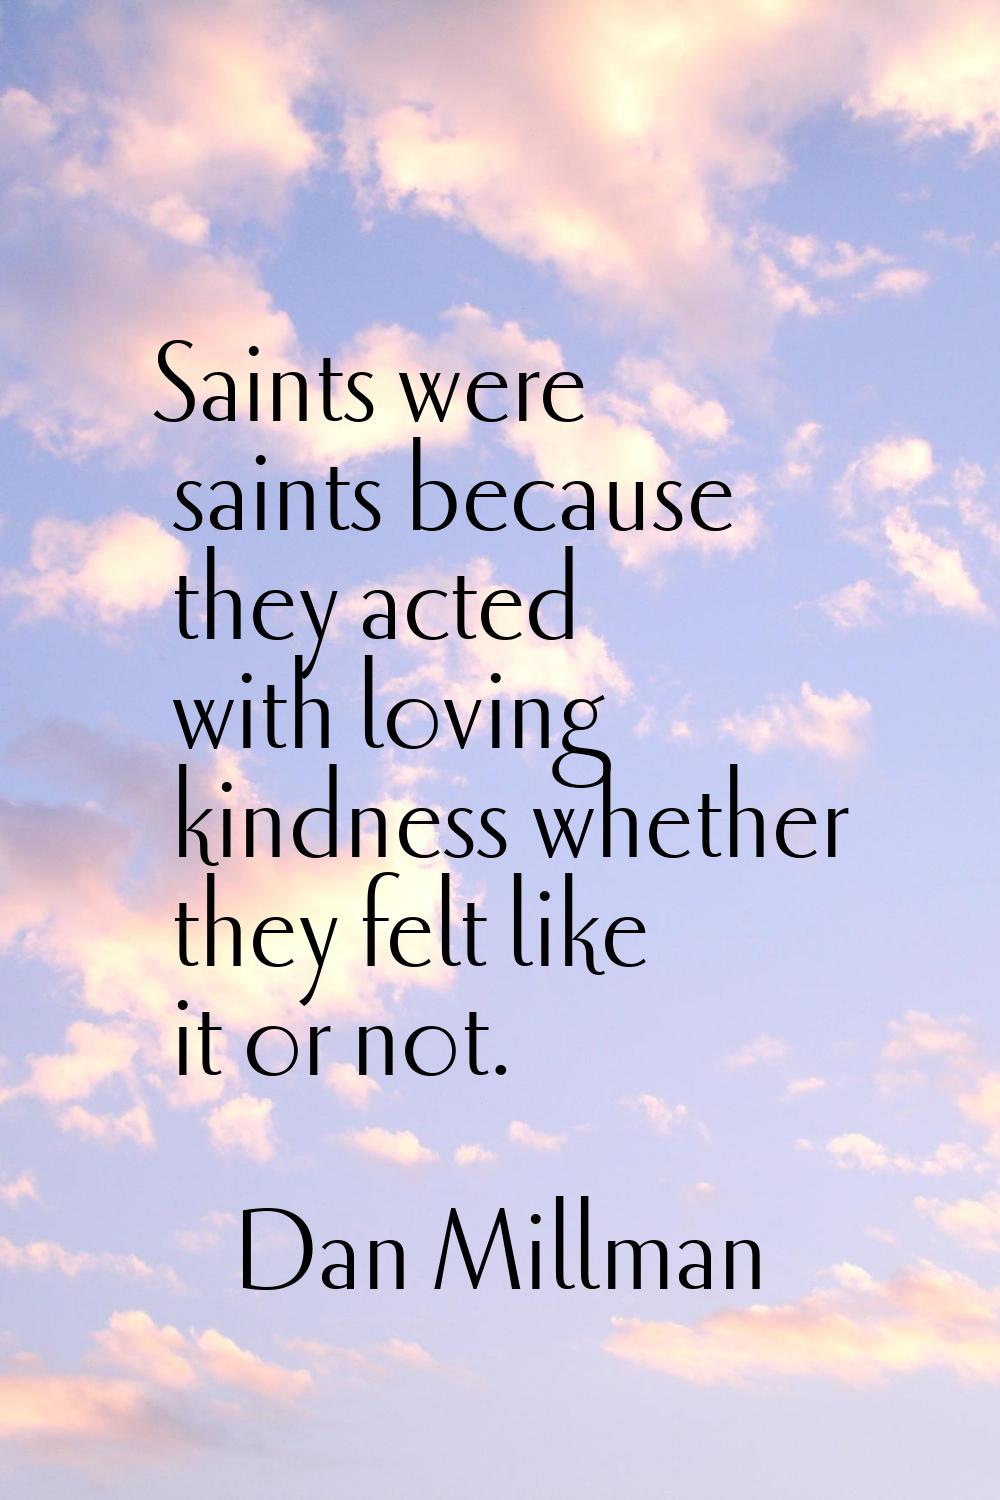 Saints were saints because they acted with loving kindness whether they felt like it or not.